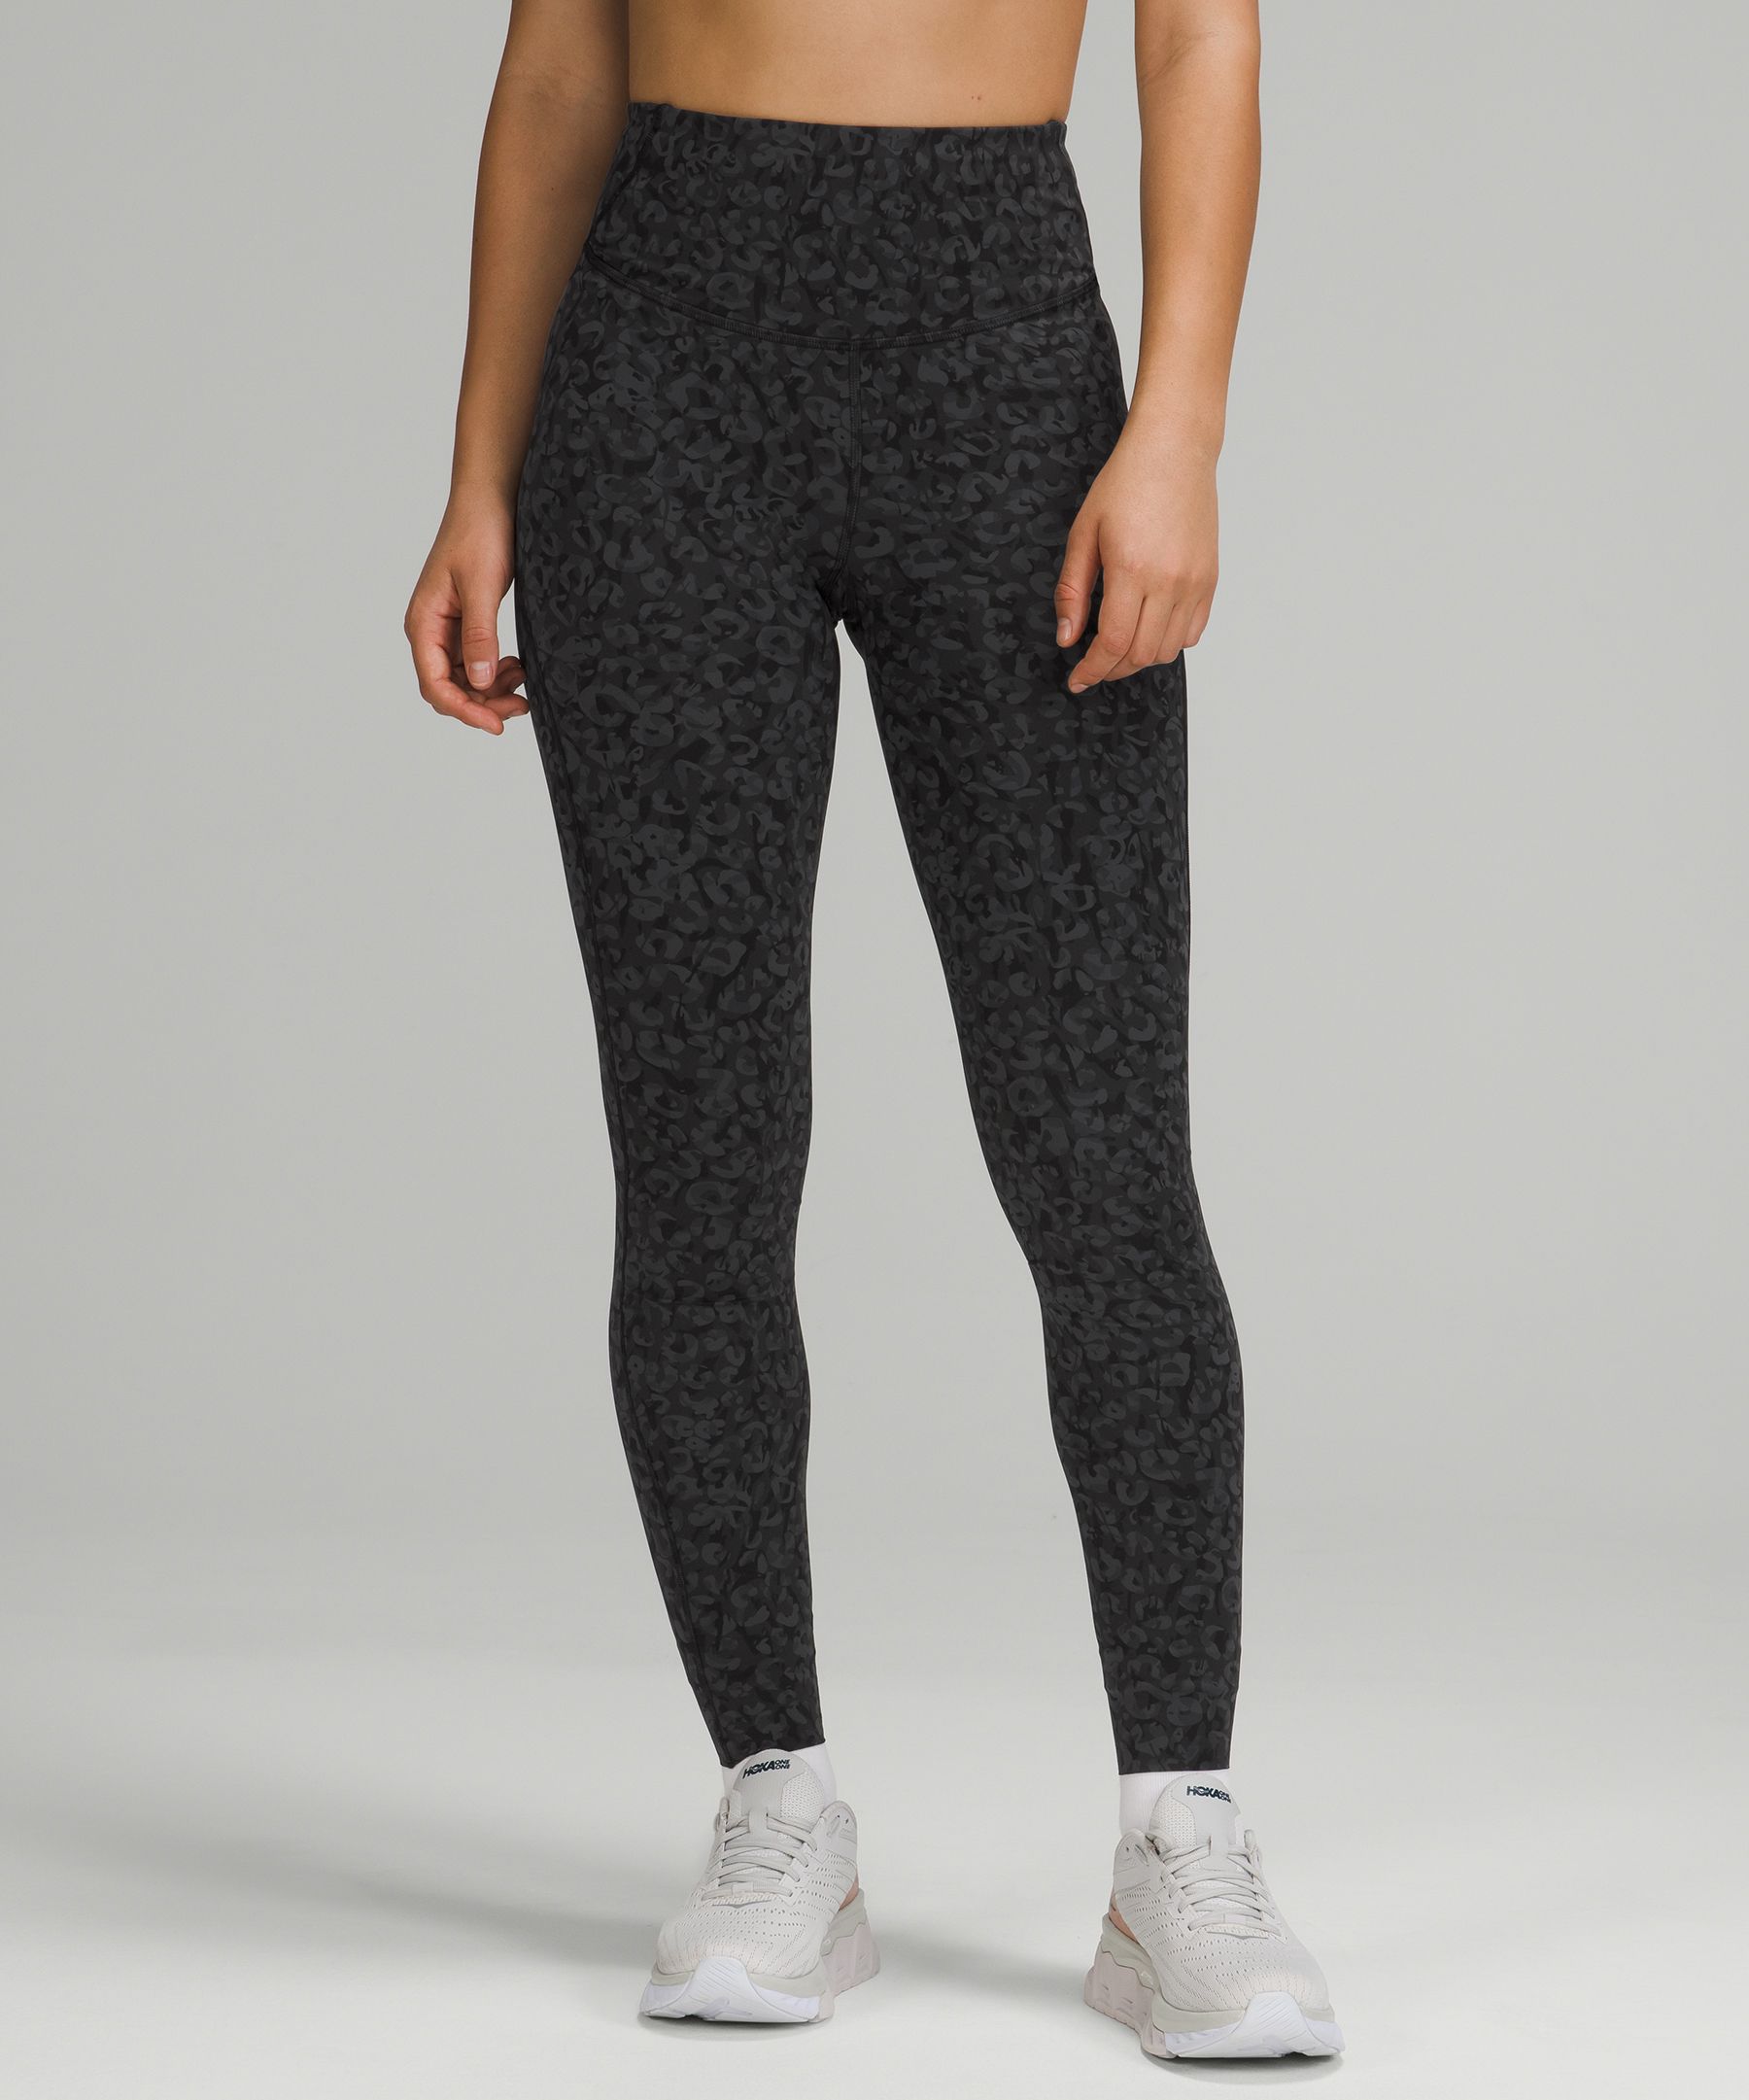 Base Pace leggings are the ultimate running leggings! Absolutely